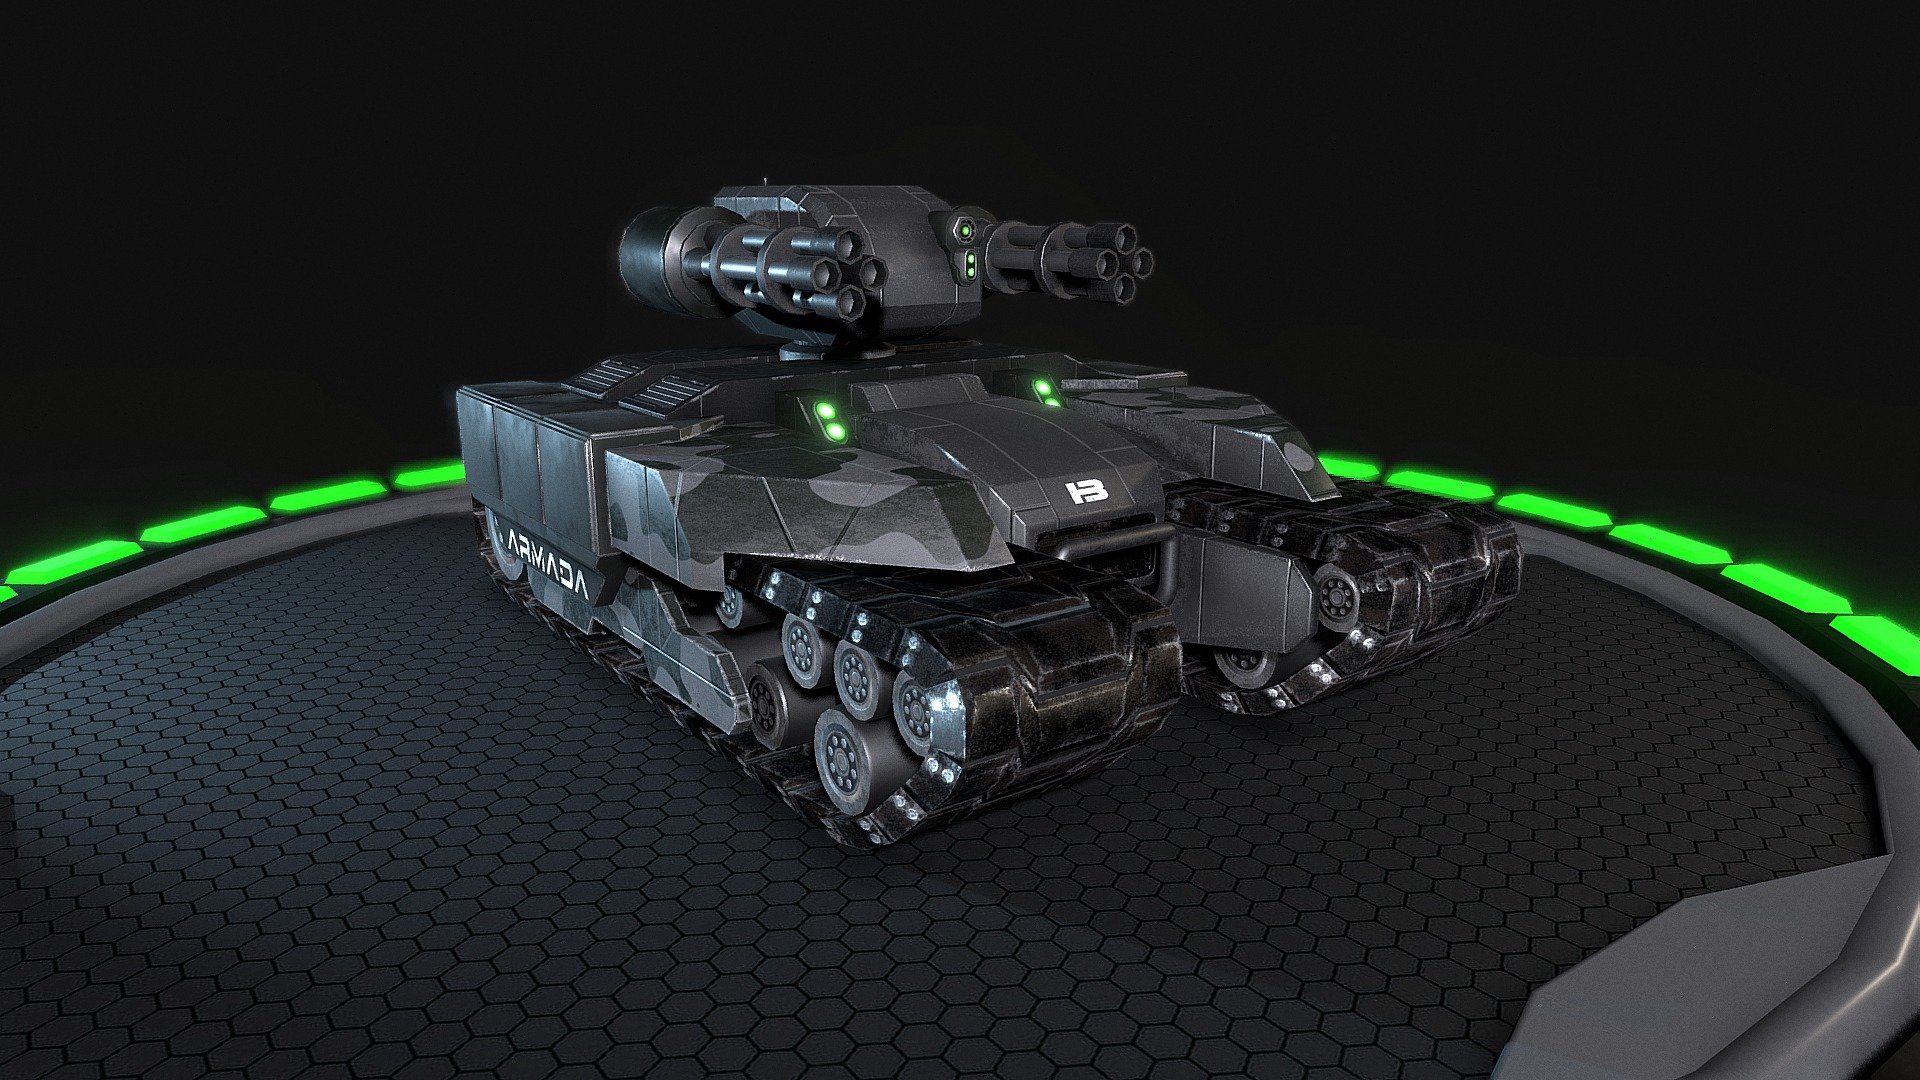 The Blitz is a fast light tank equipped with 2 short range rapid fire plasma cannons. It is ideal for fast raiding in enemy territory. 

This model is high poly version based on the my remodelled Armada Blitz Tank from the rts game Beyond All Reason. Used as experimental playground to get used to baking, procedural textures and other techniques. Made completly in Blender.

&hellip;and hey guys. dont be shy and let a like or comment. thank you! - Light Plasma Tank "Blitz V2" - 3D model by Flaka76 3d model